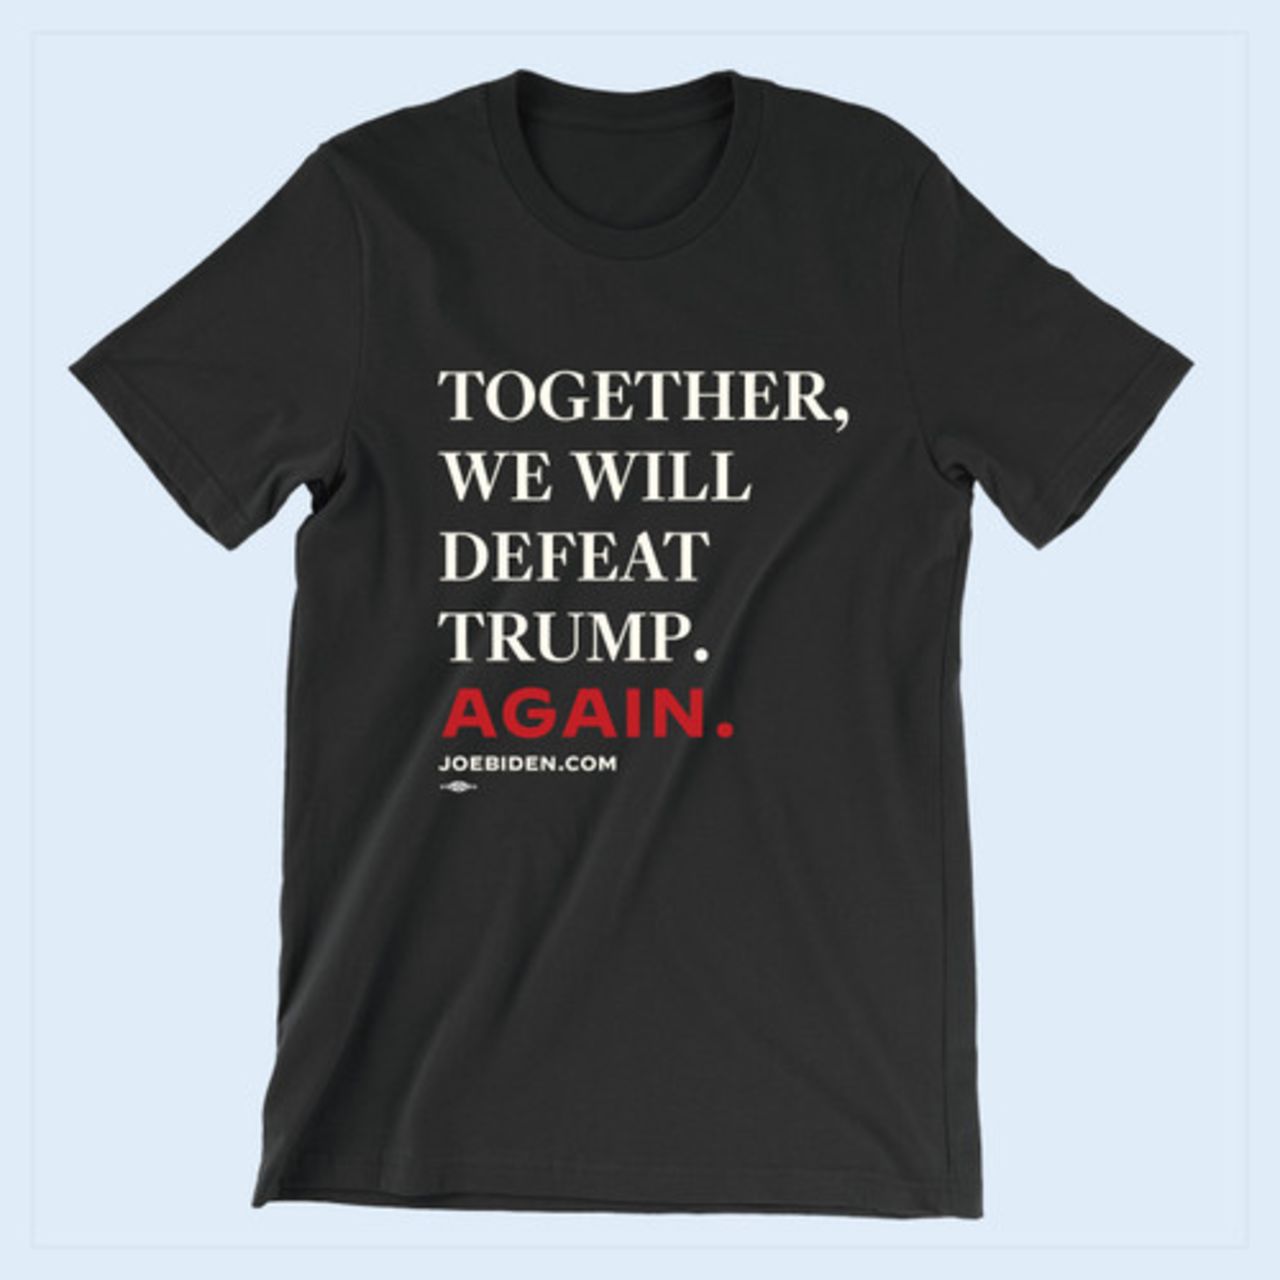 "Together, We Will Defeat Donald Trump Again" shirt.